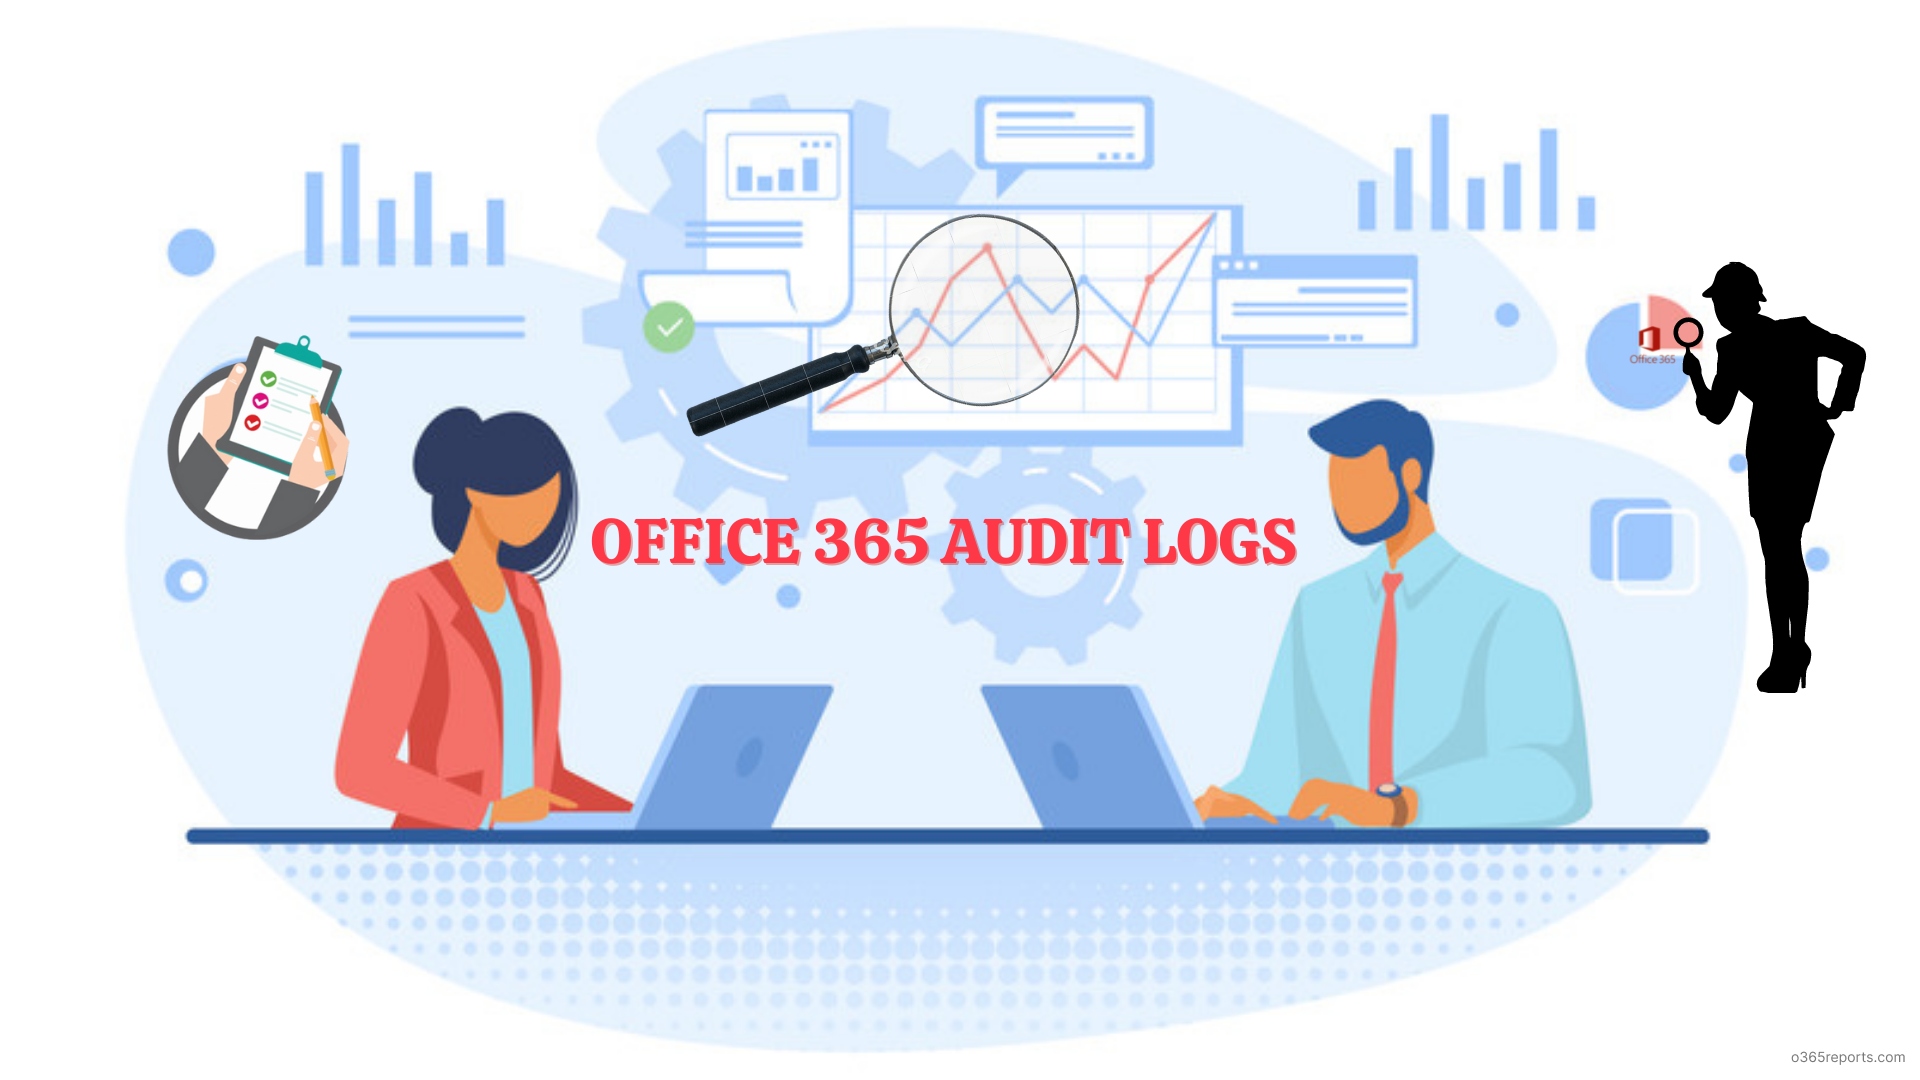 Office 365 Audit logs featured image